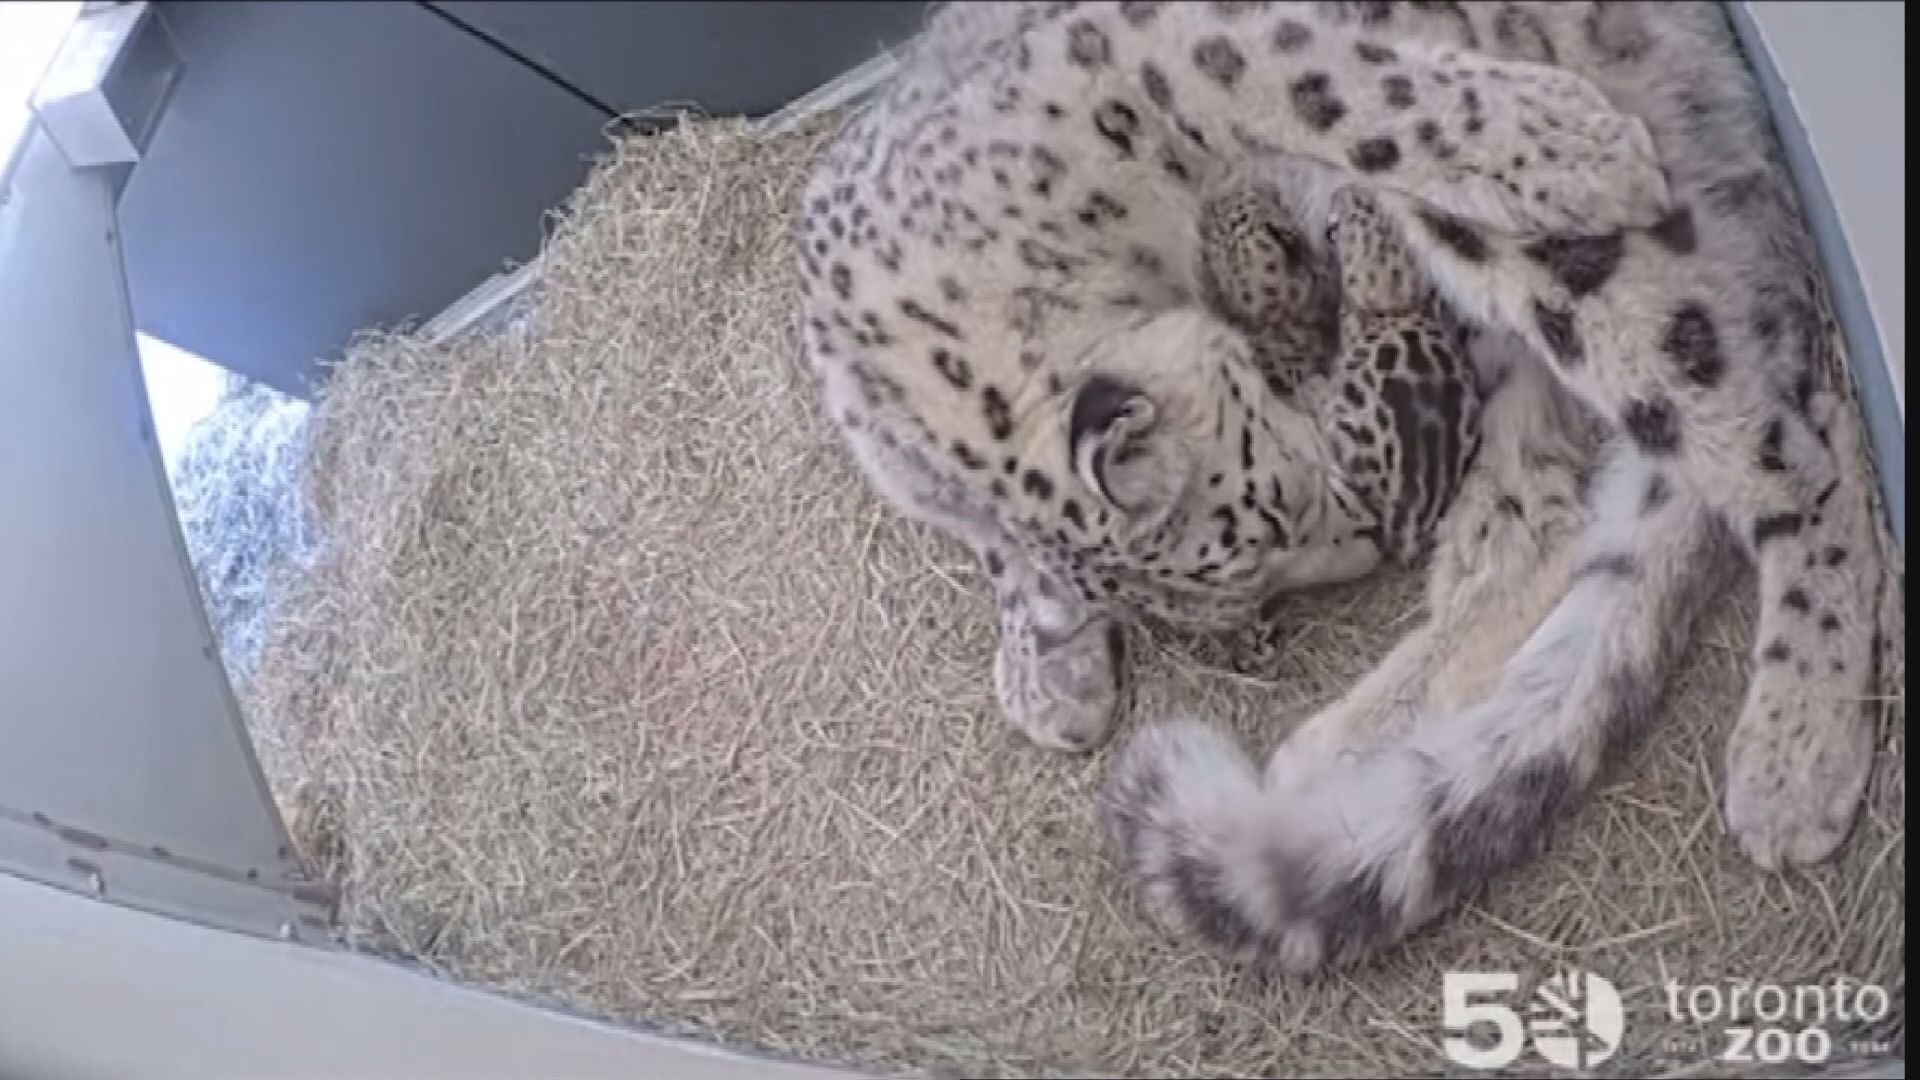 Toronto Zoo celebrating the birth of snow leopard cubs and it's 50th anniversary